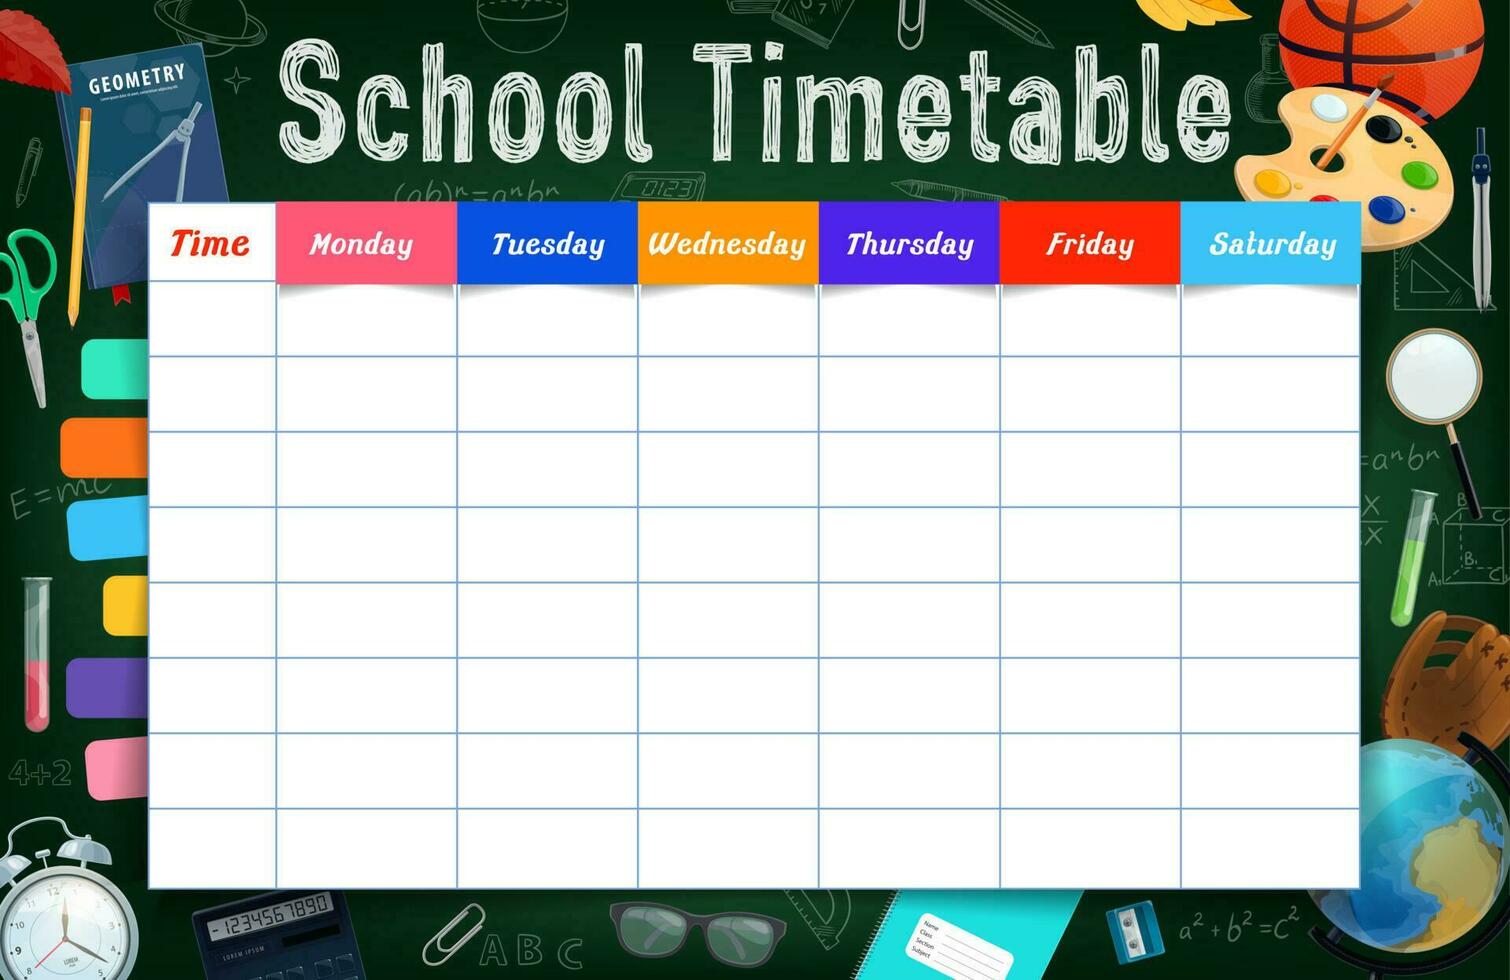 School timetable with stationery and chalkboard vector